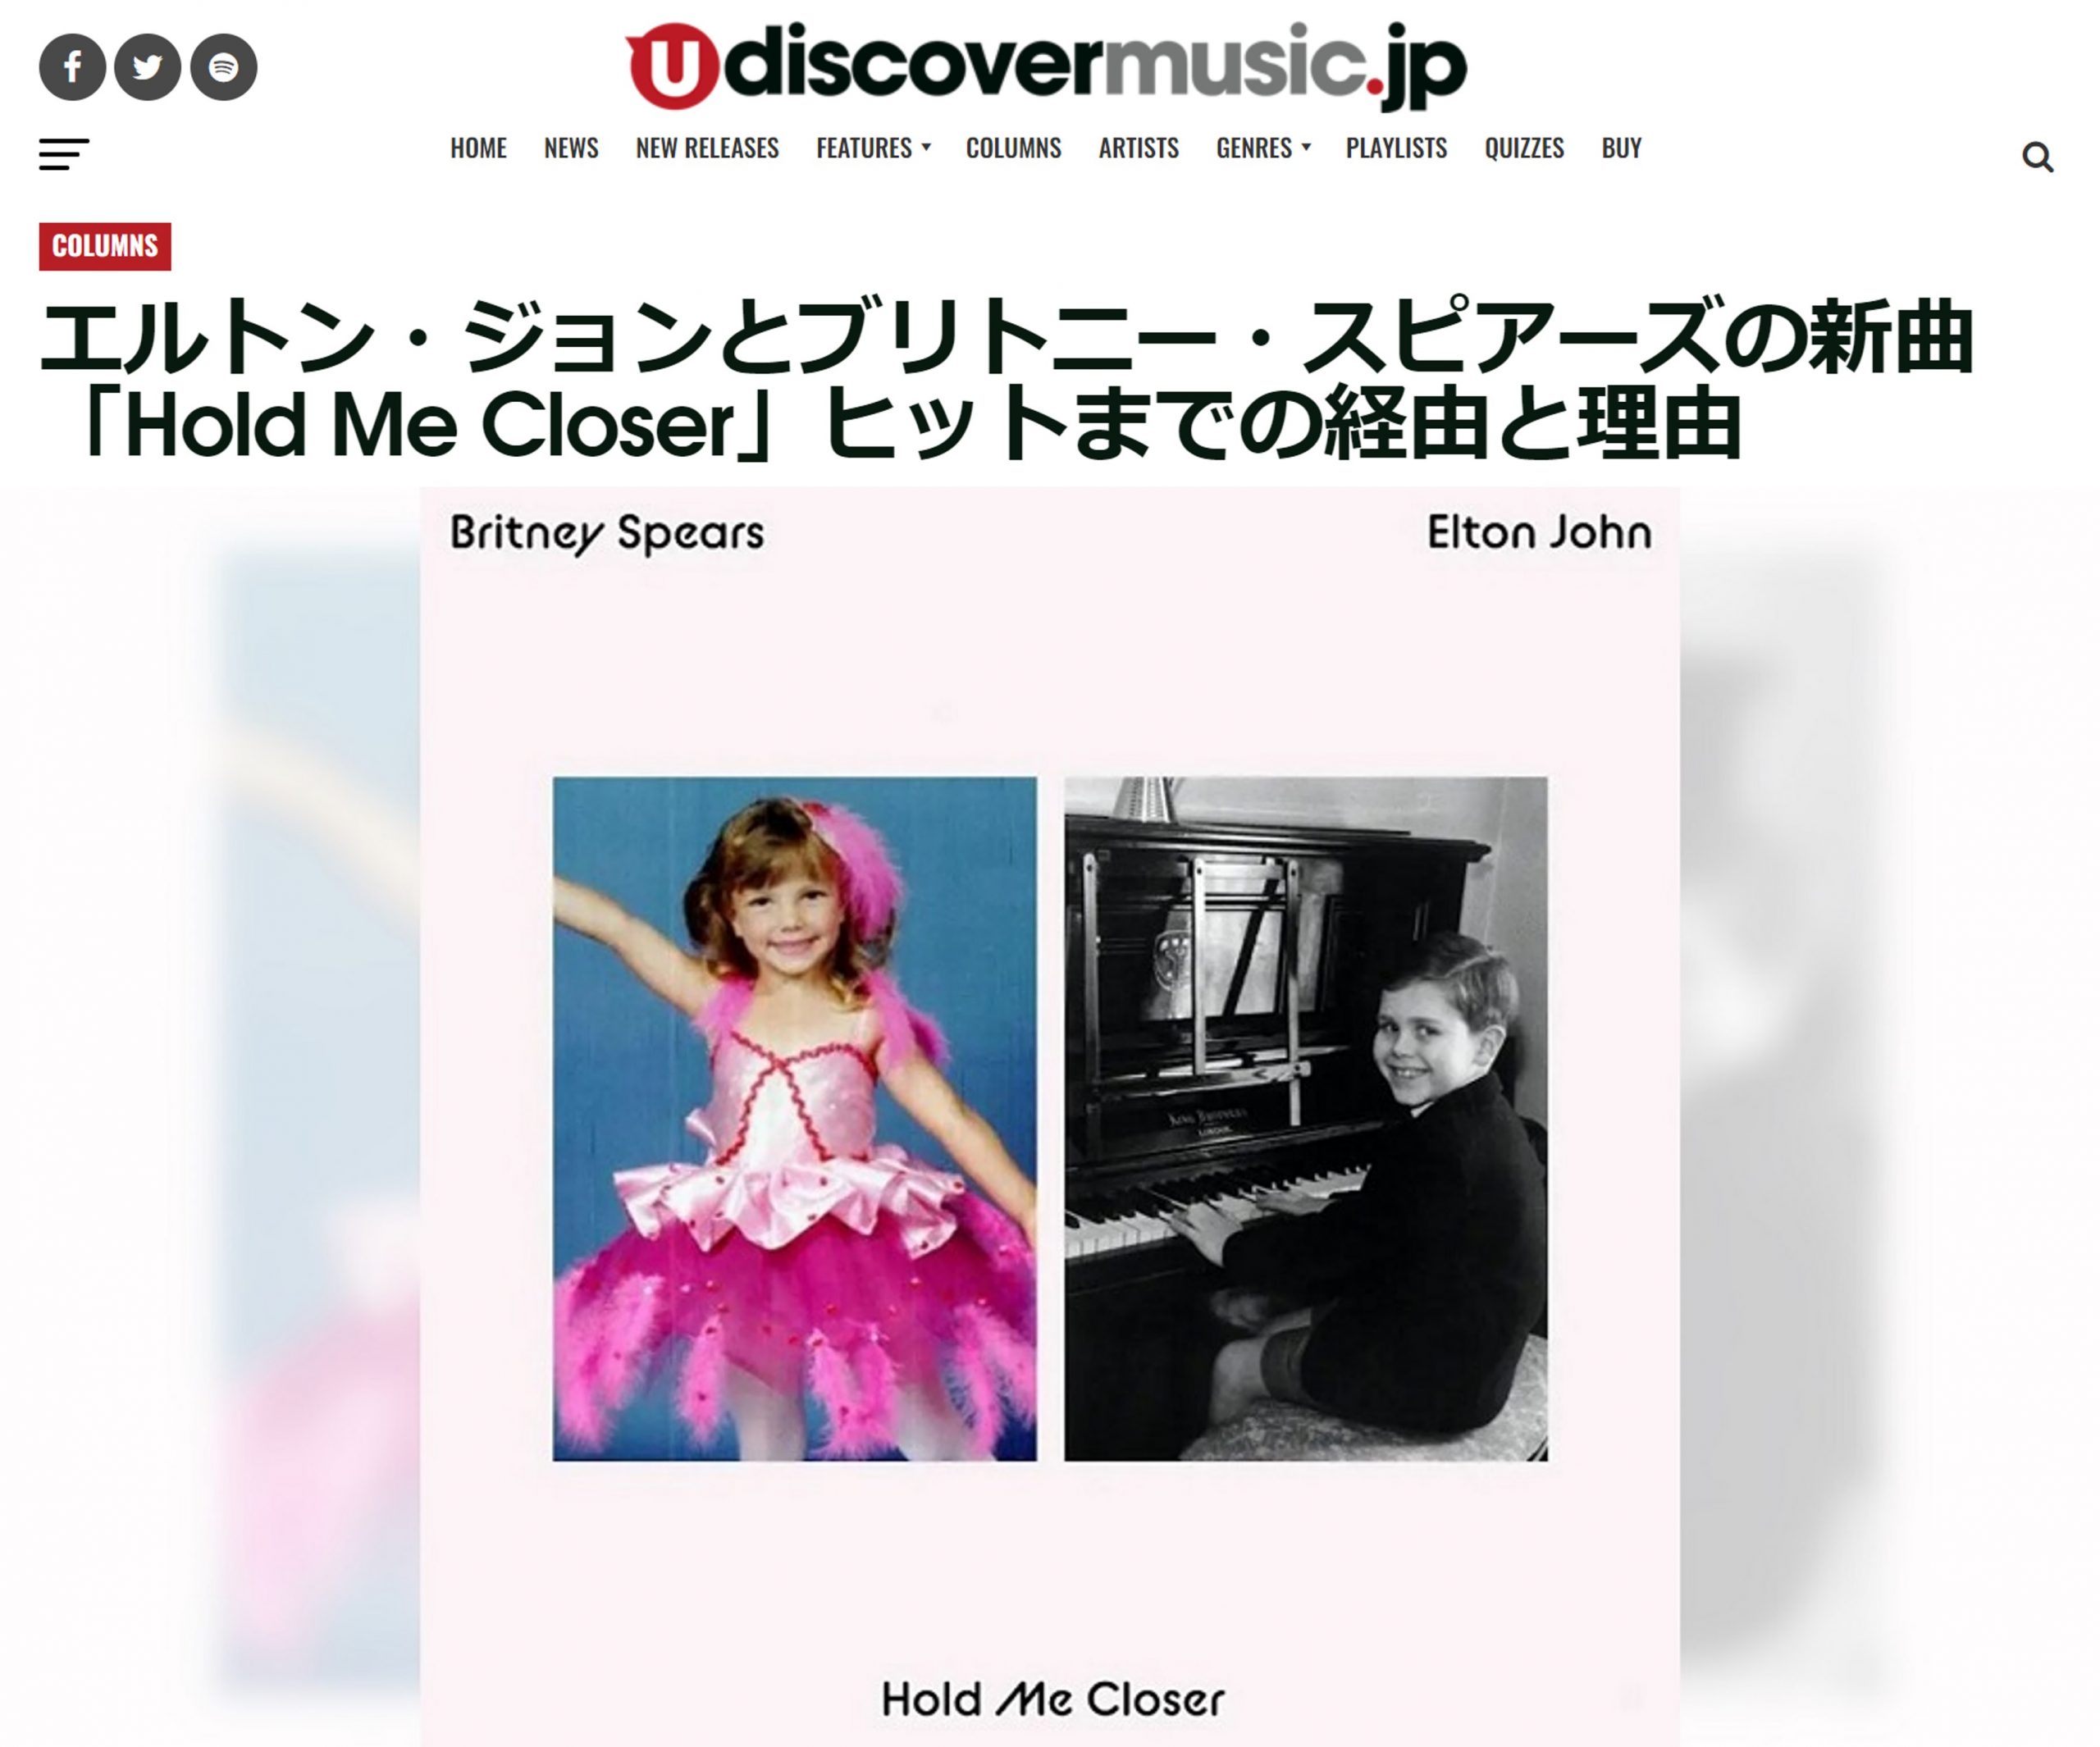 uDiscover解説掲載＞「Hold Me Closer」ヒットまでの経由と理由 